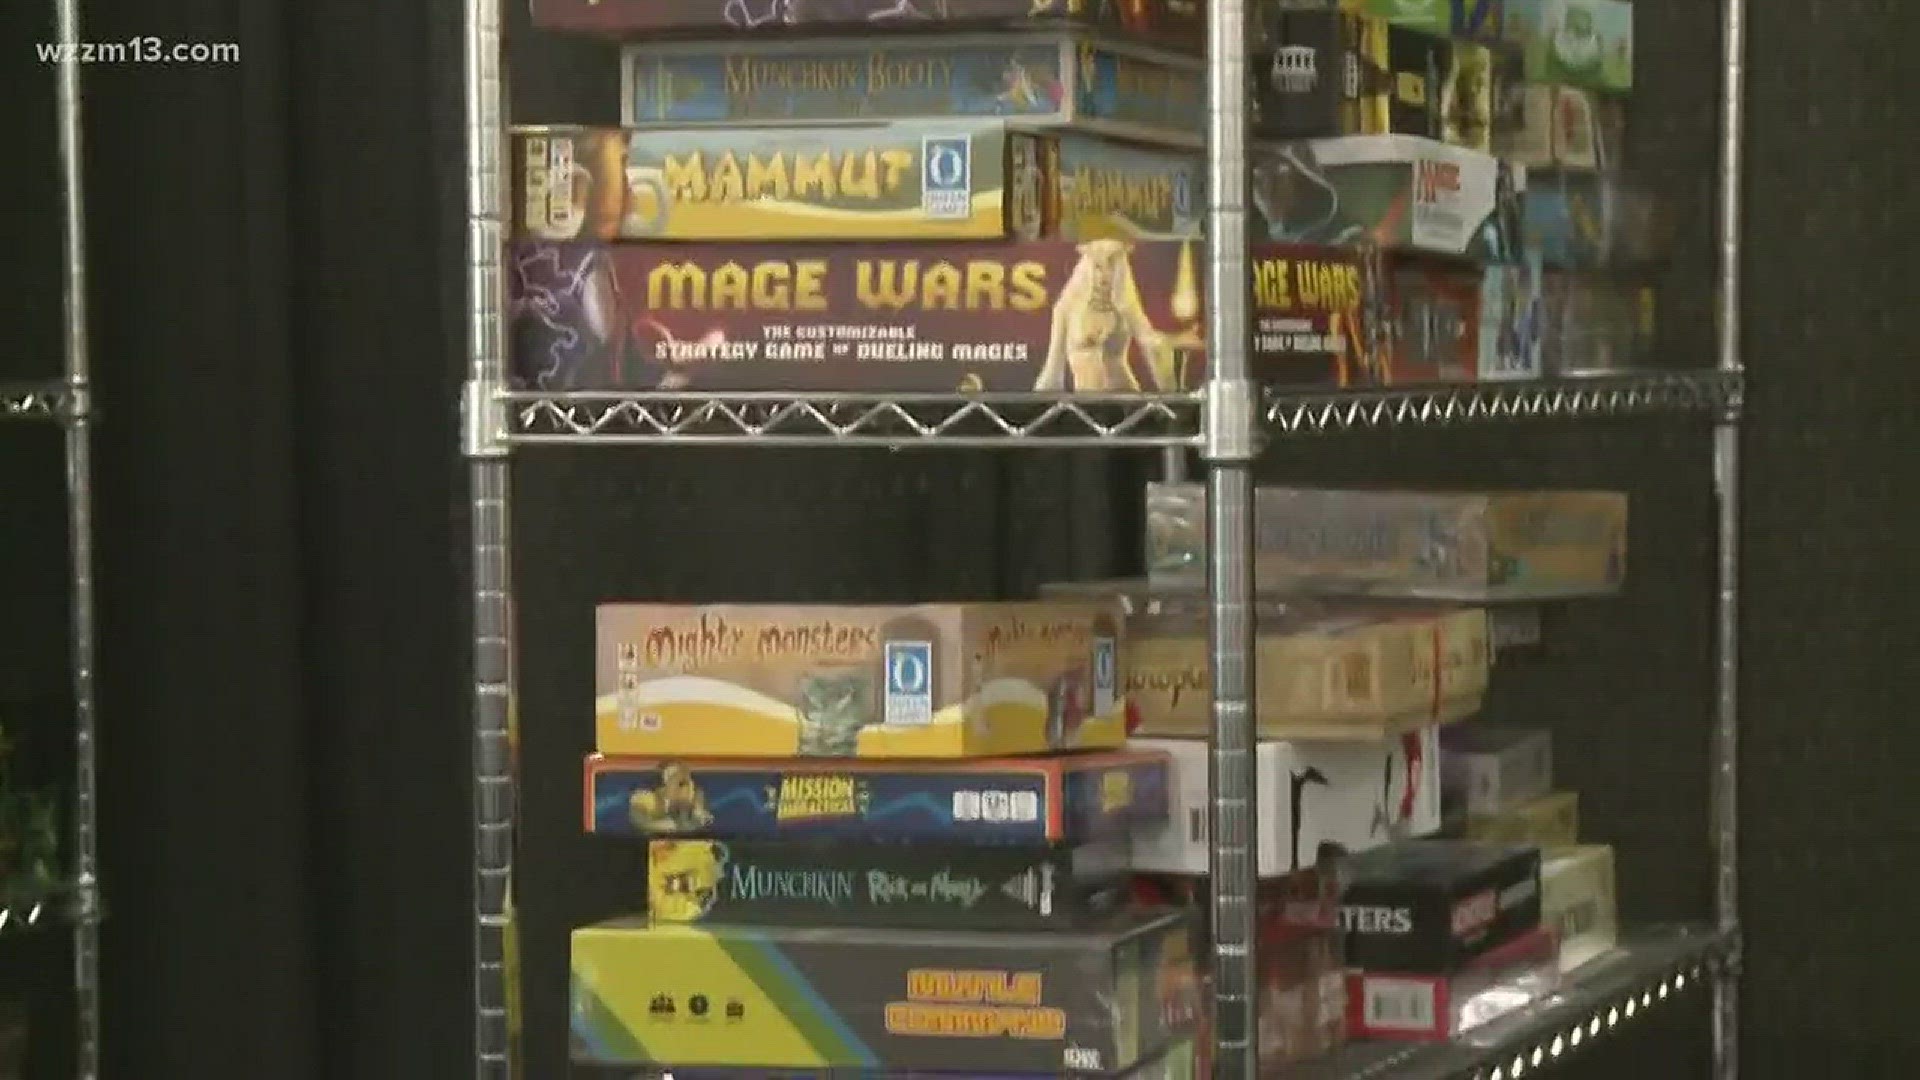 Board game convention held in Grand Rapids